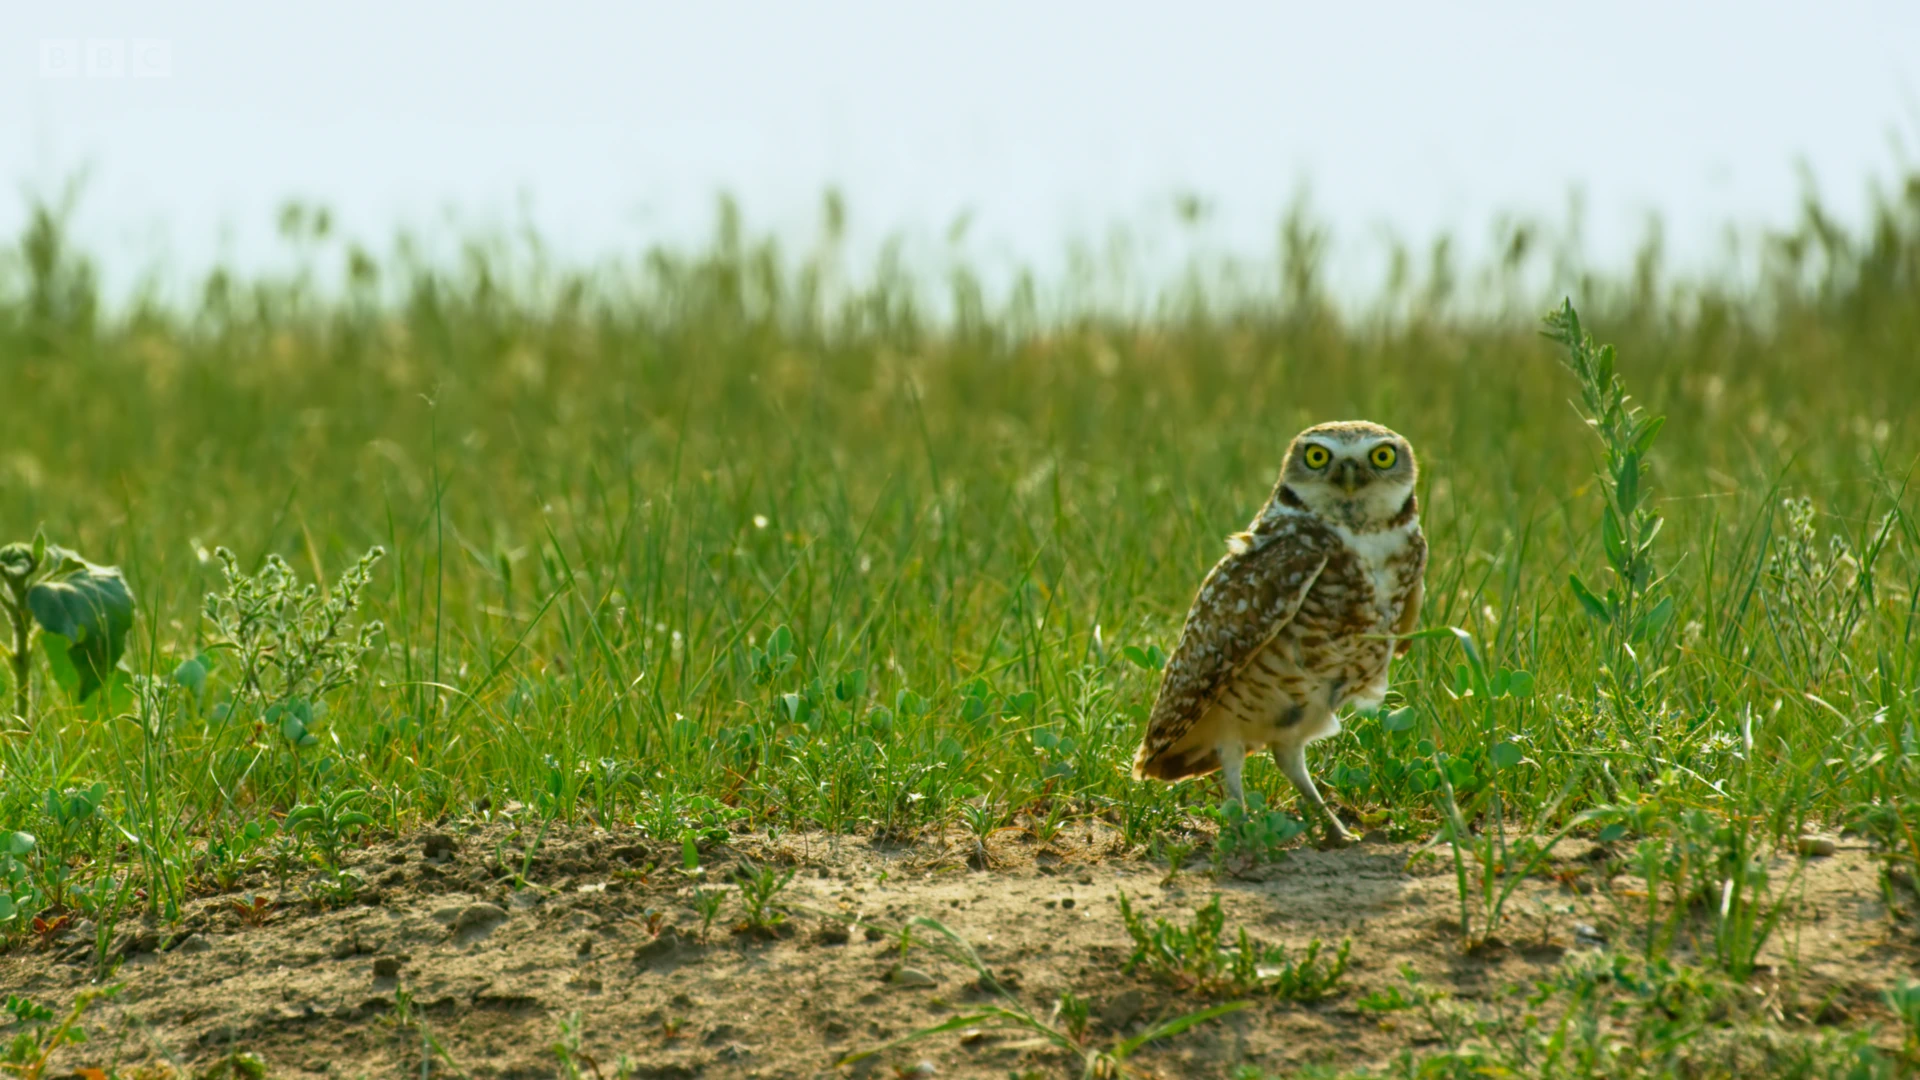 Western burrowing owl (Athene cunicularia hypugaea) as shown in Seven Worlds, One Planet - North America